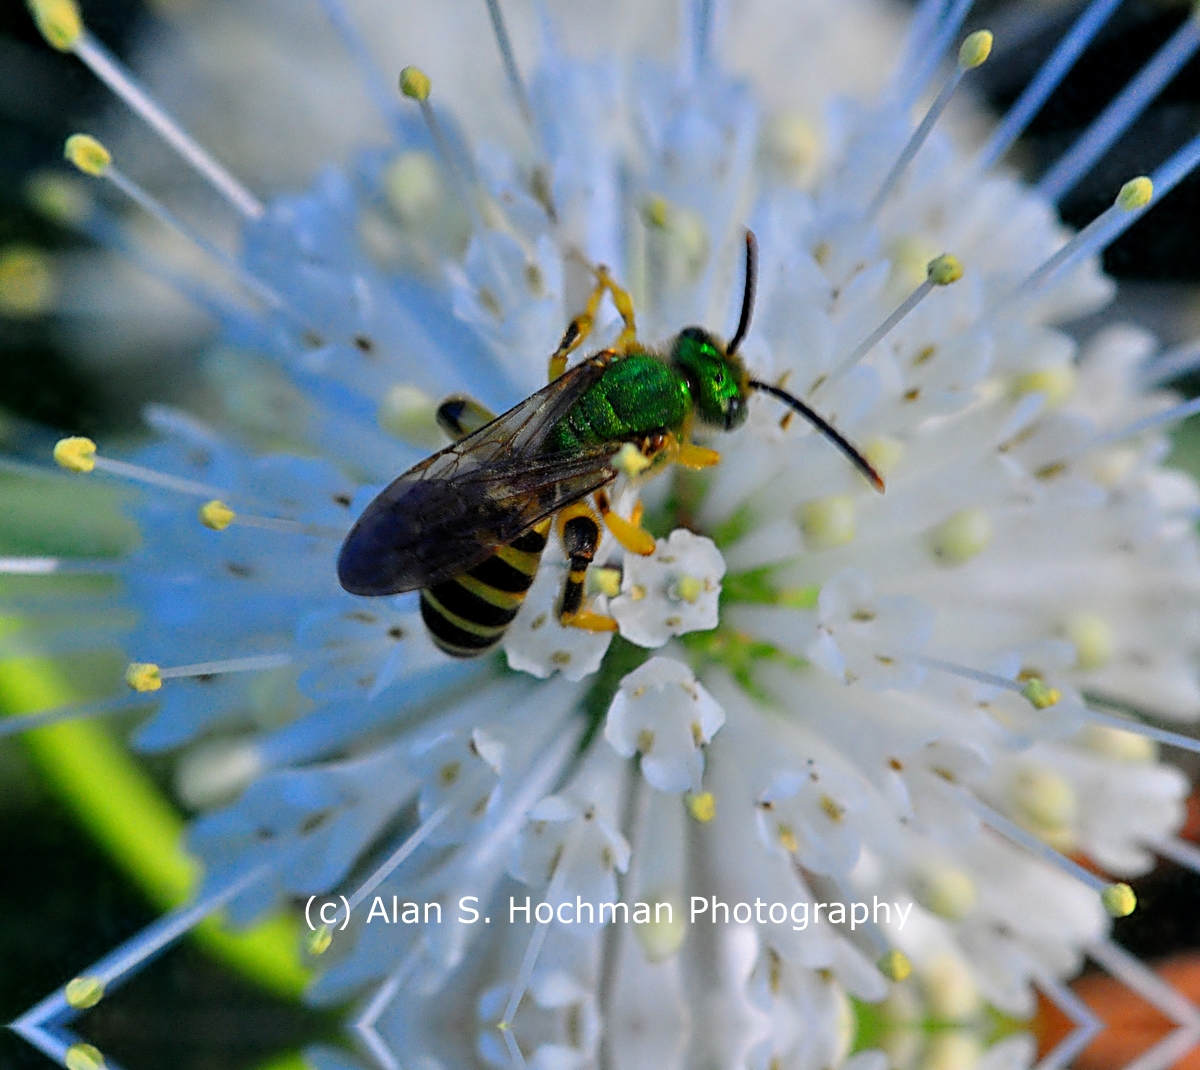 "Wasp with green metallic body"